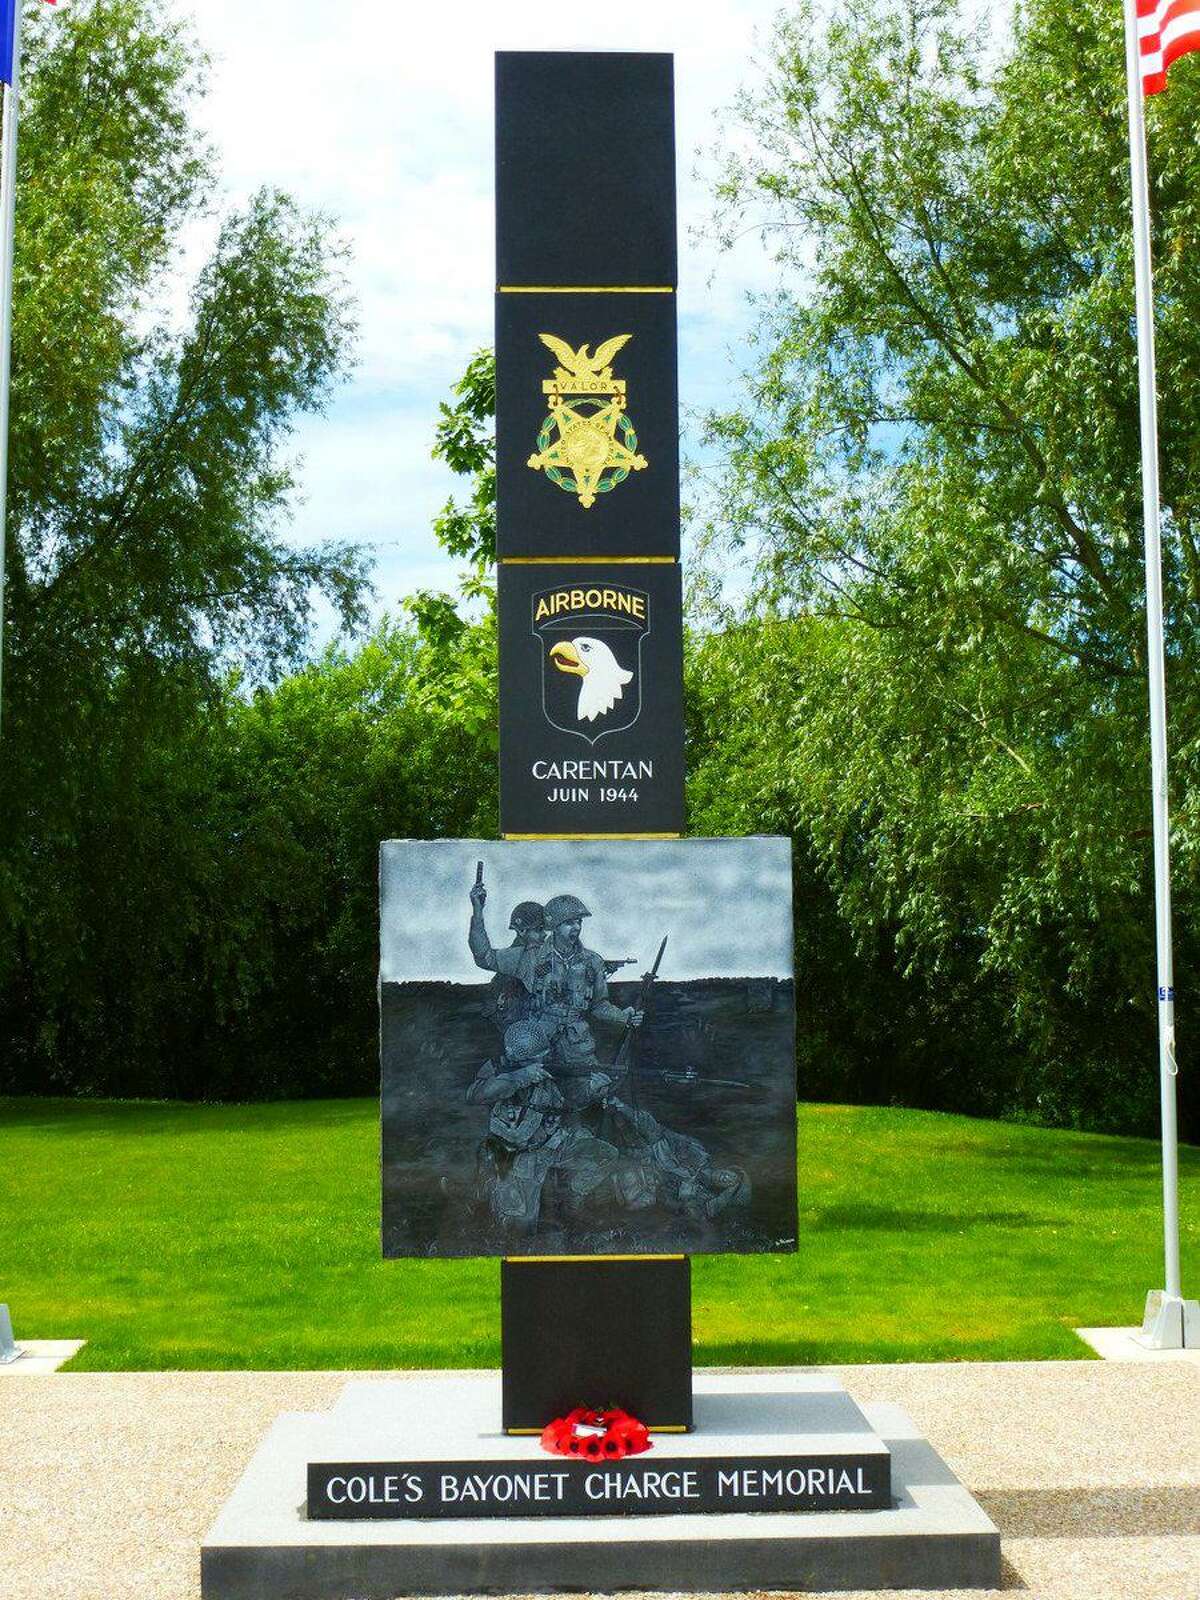 A dark stone monolith with an engraved Medal of Honor and the 101st Airborne Unit insignia is at the spot in France where Lt. Col. Robert Cole led his battalion in a bayonet charge after being hopelessly pinned down to drive back the enemy and secure the approach to Carentan. Cole was awarded the Medal of Honor for his actions here.